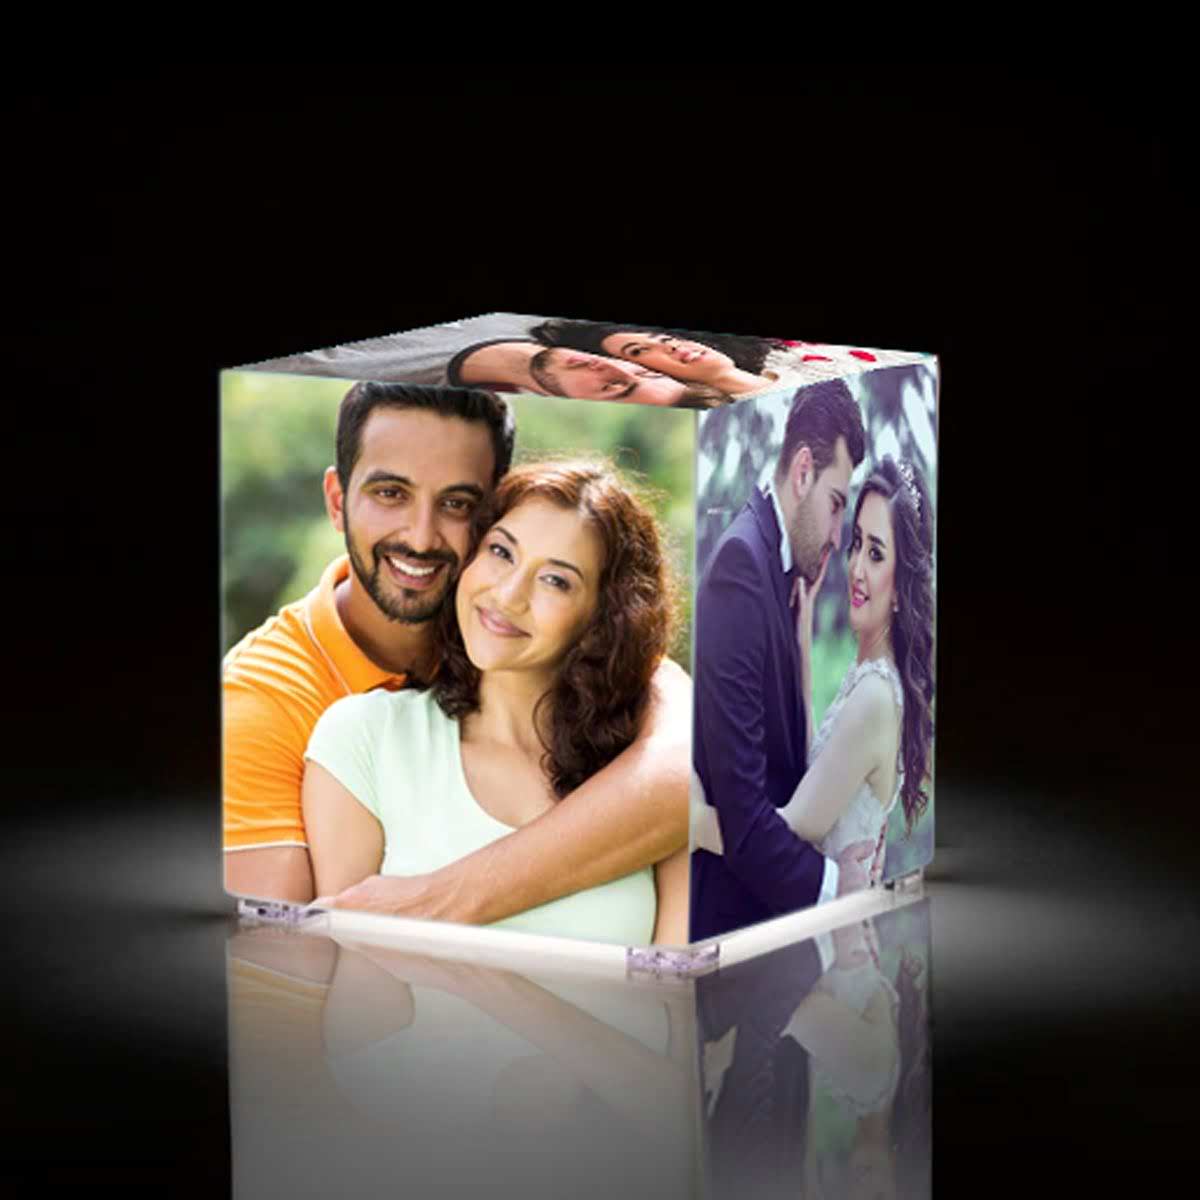 Cubelit Personalised Lamp - Perfect Anniversary Gift with photos